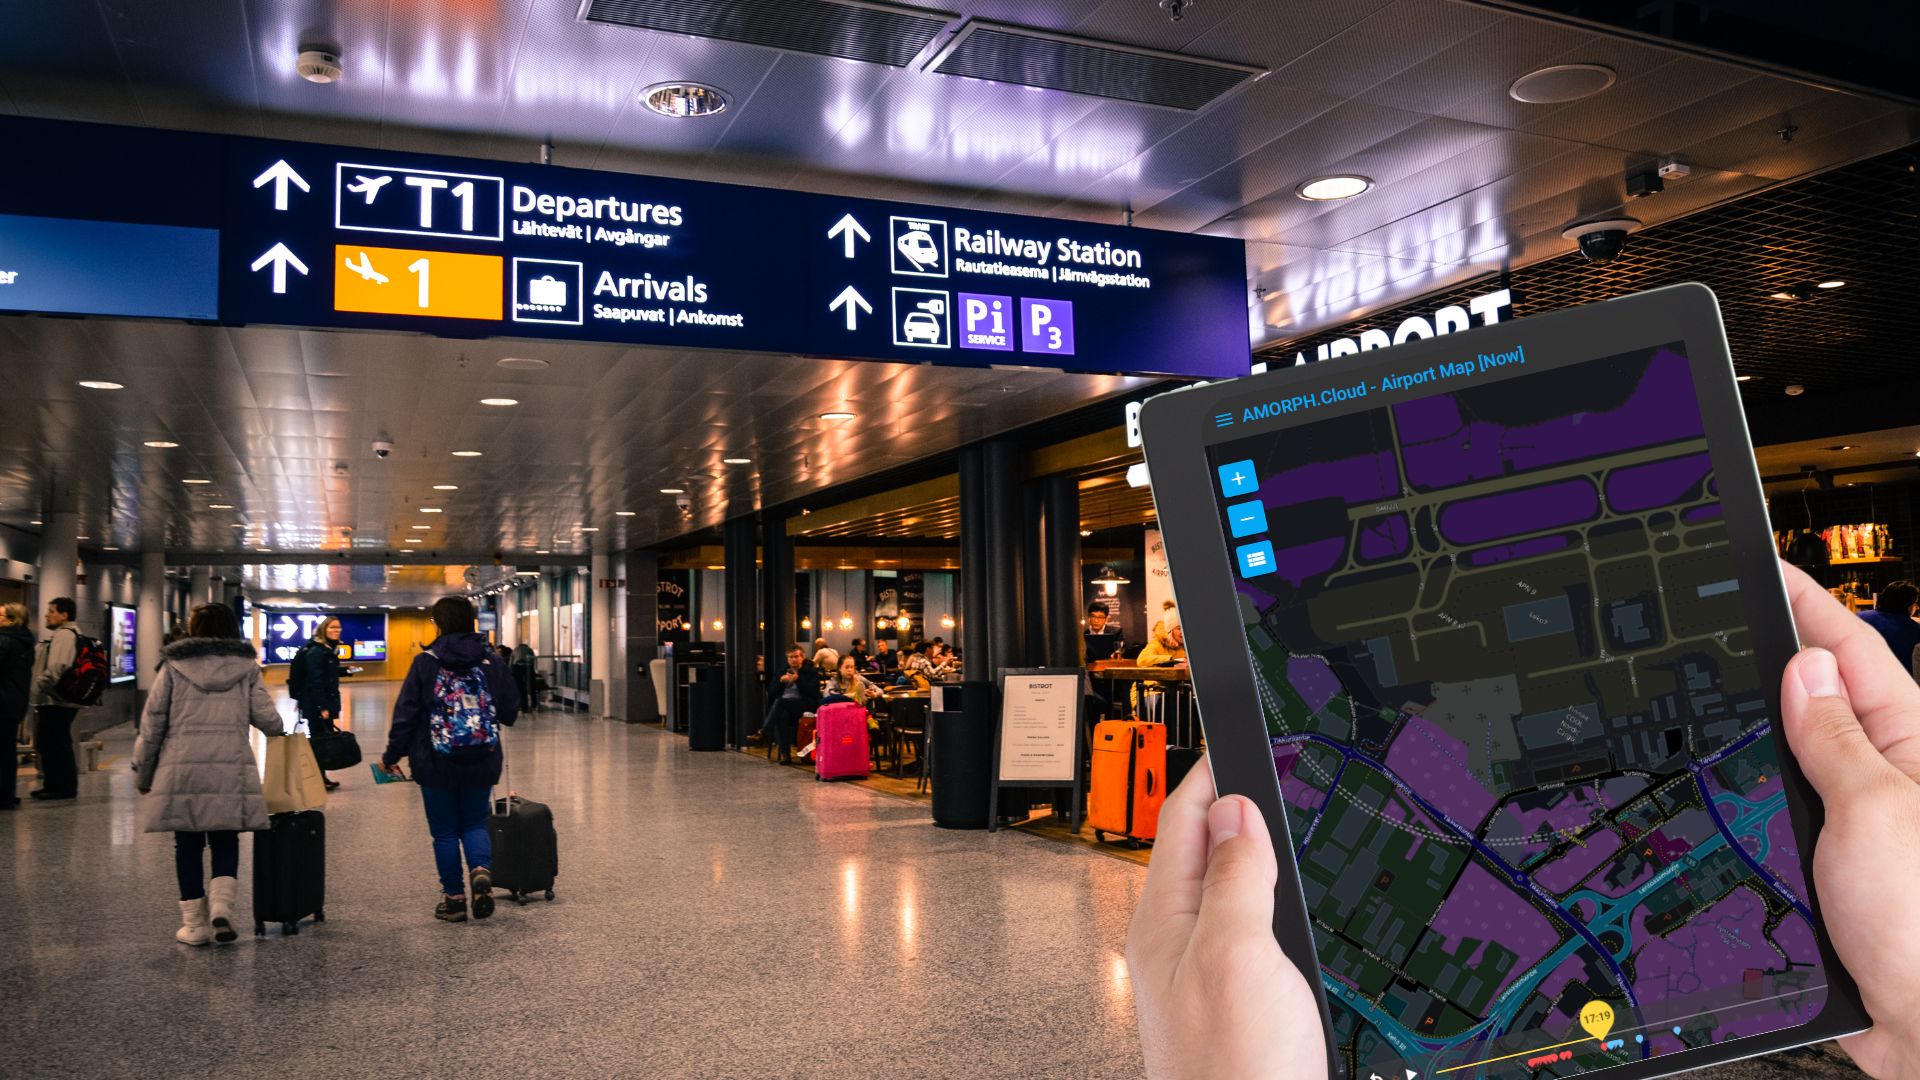 How can technology improve airport operations?
